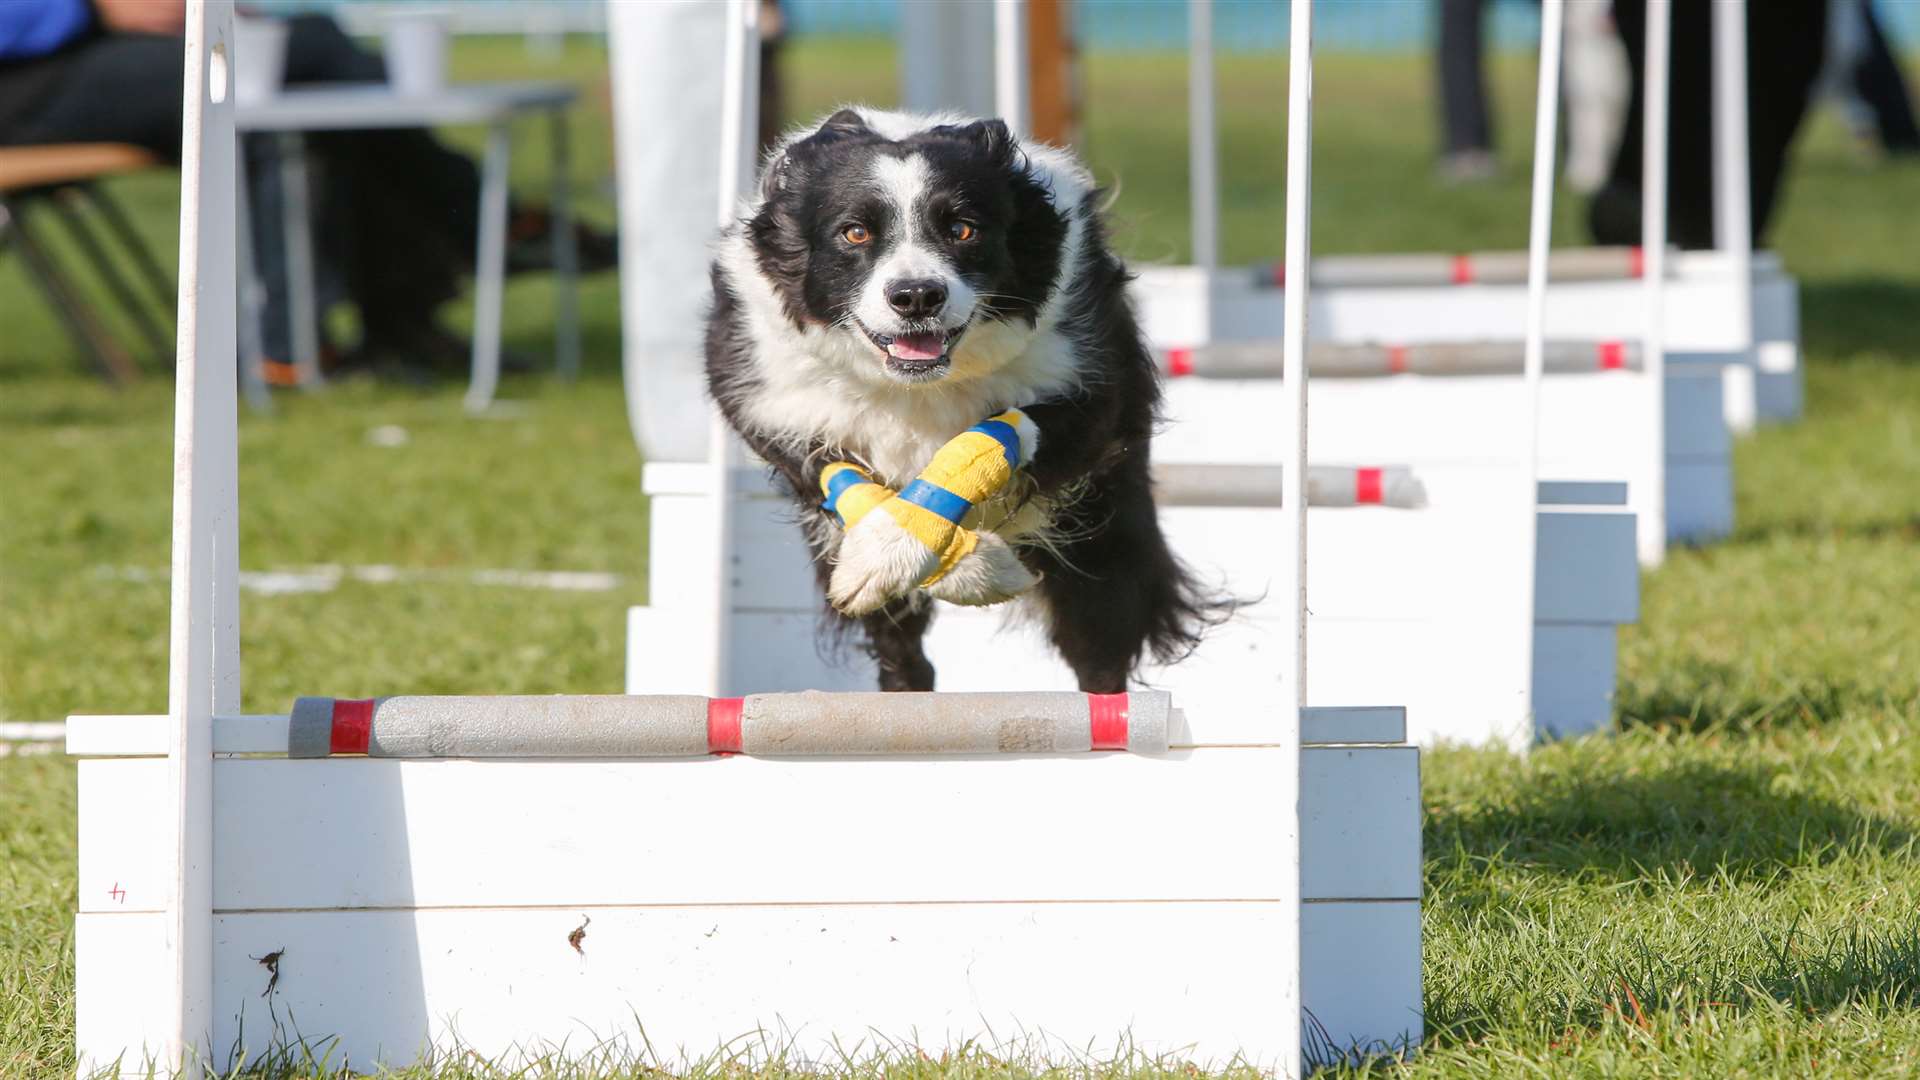 Quinn the border collie from the Shooting Stars flyball team